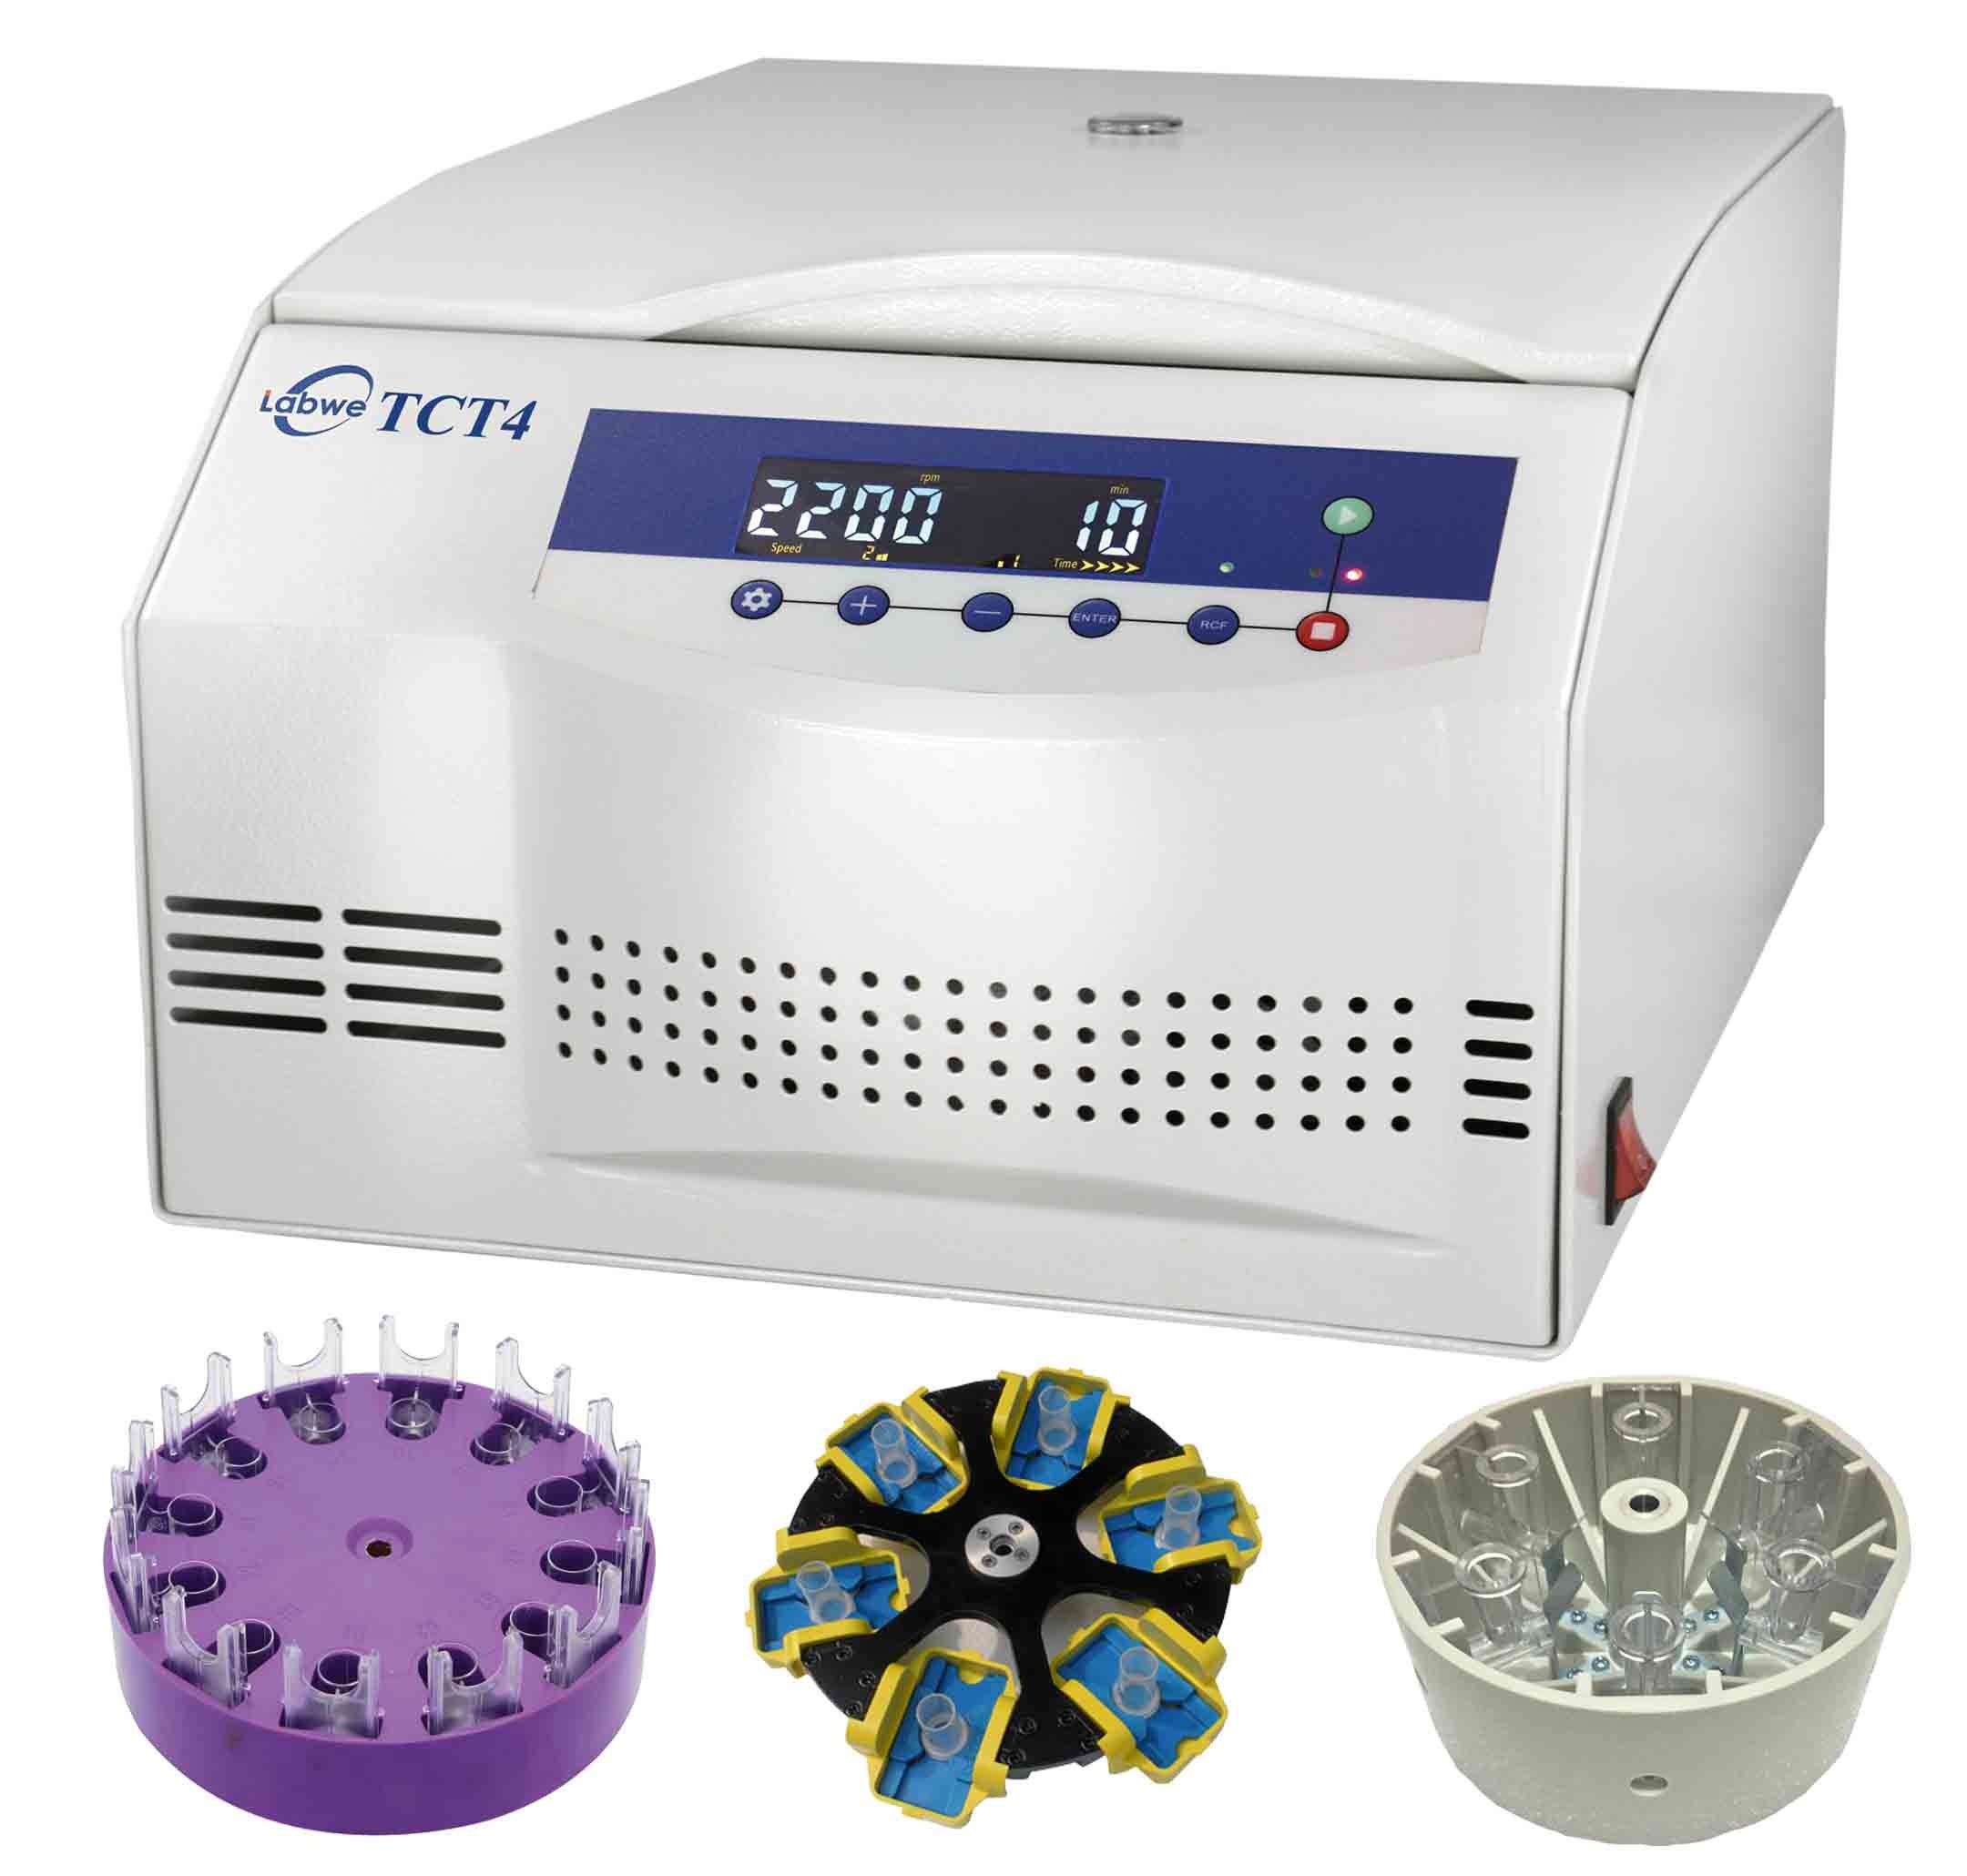  Steel Body Cytospin Centrifuge TCT4 12 Samples Capacity With Brushless Motor Manufactures